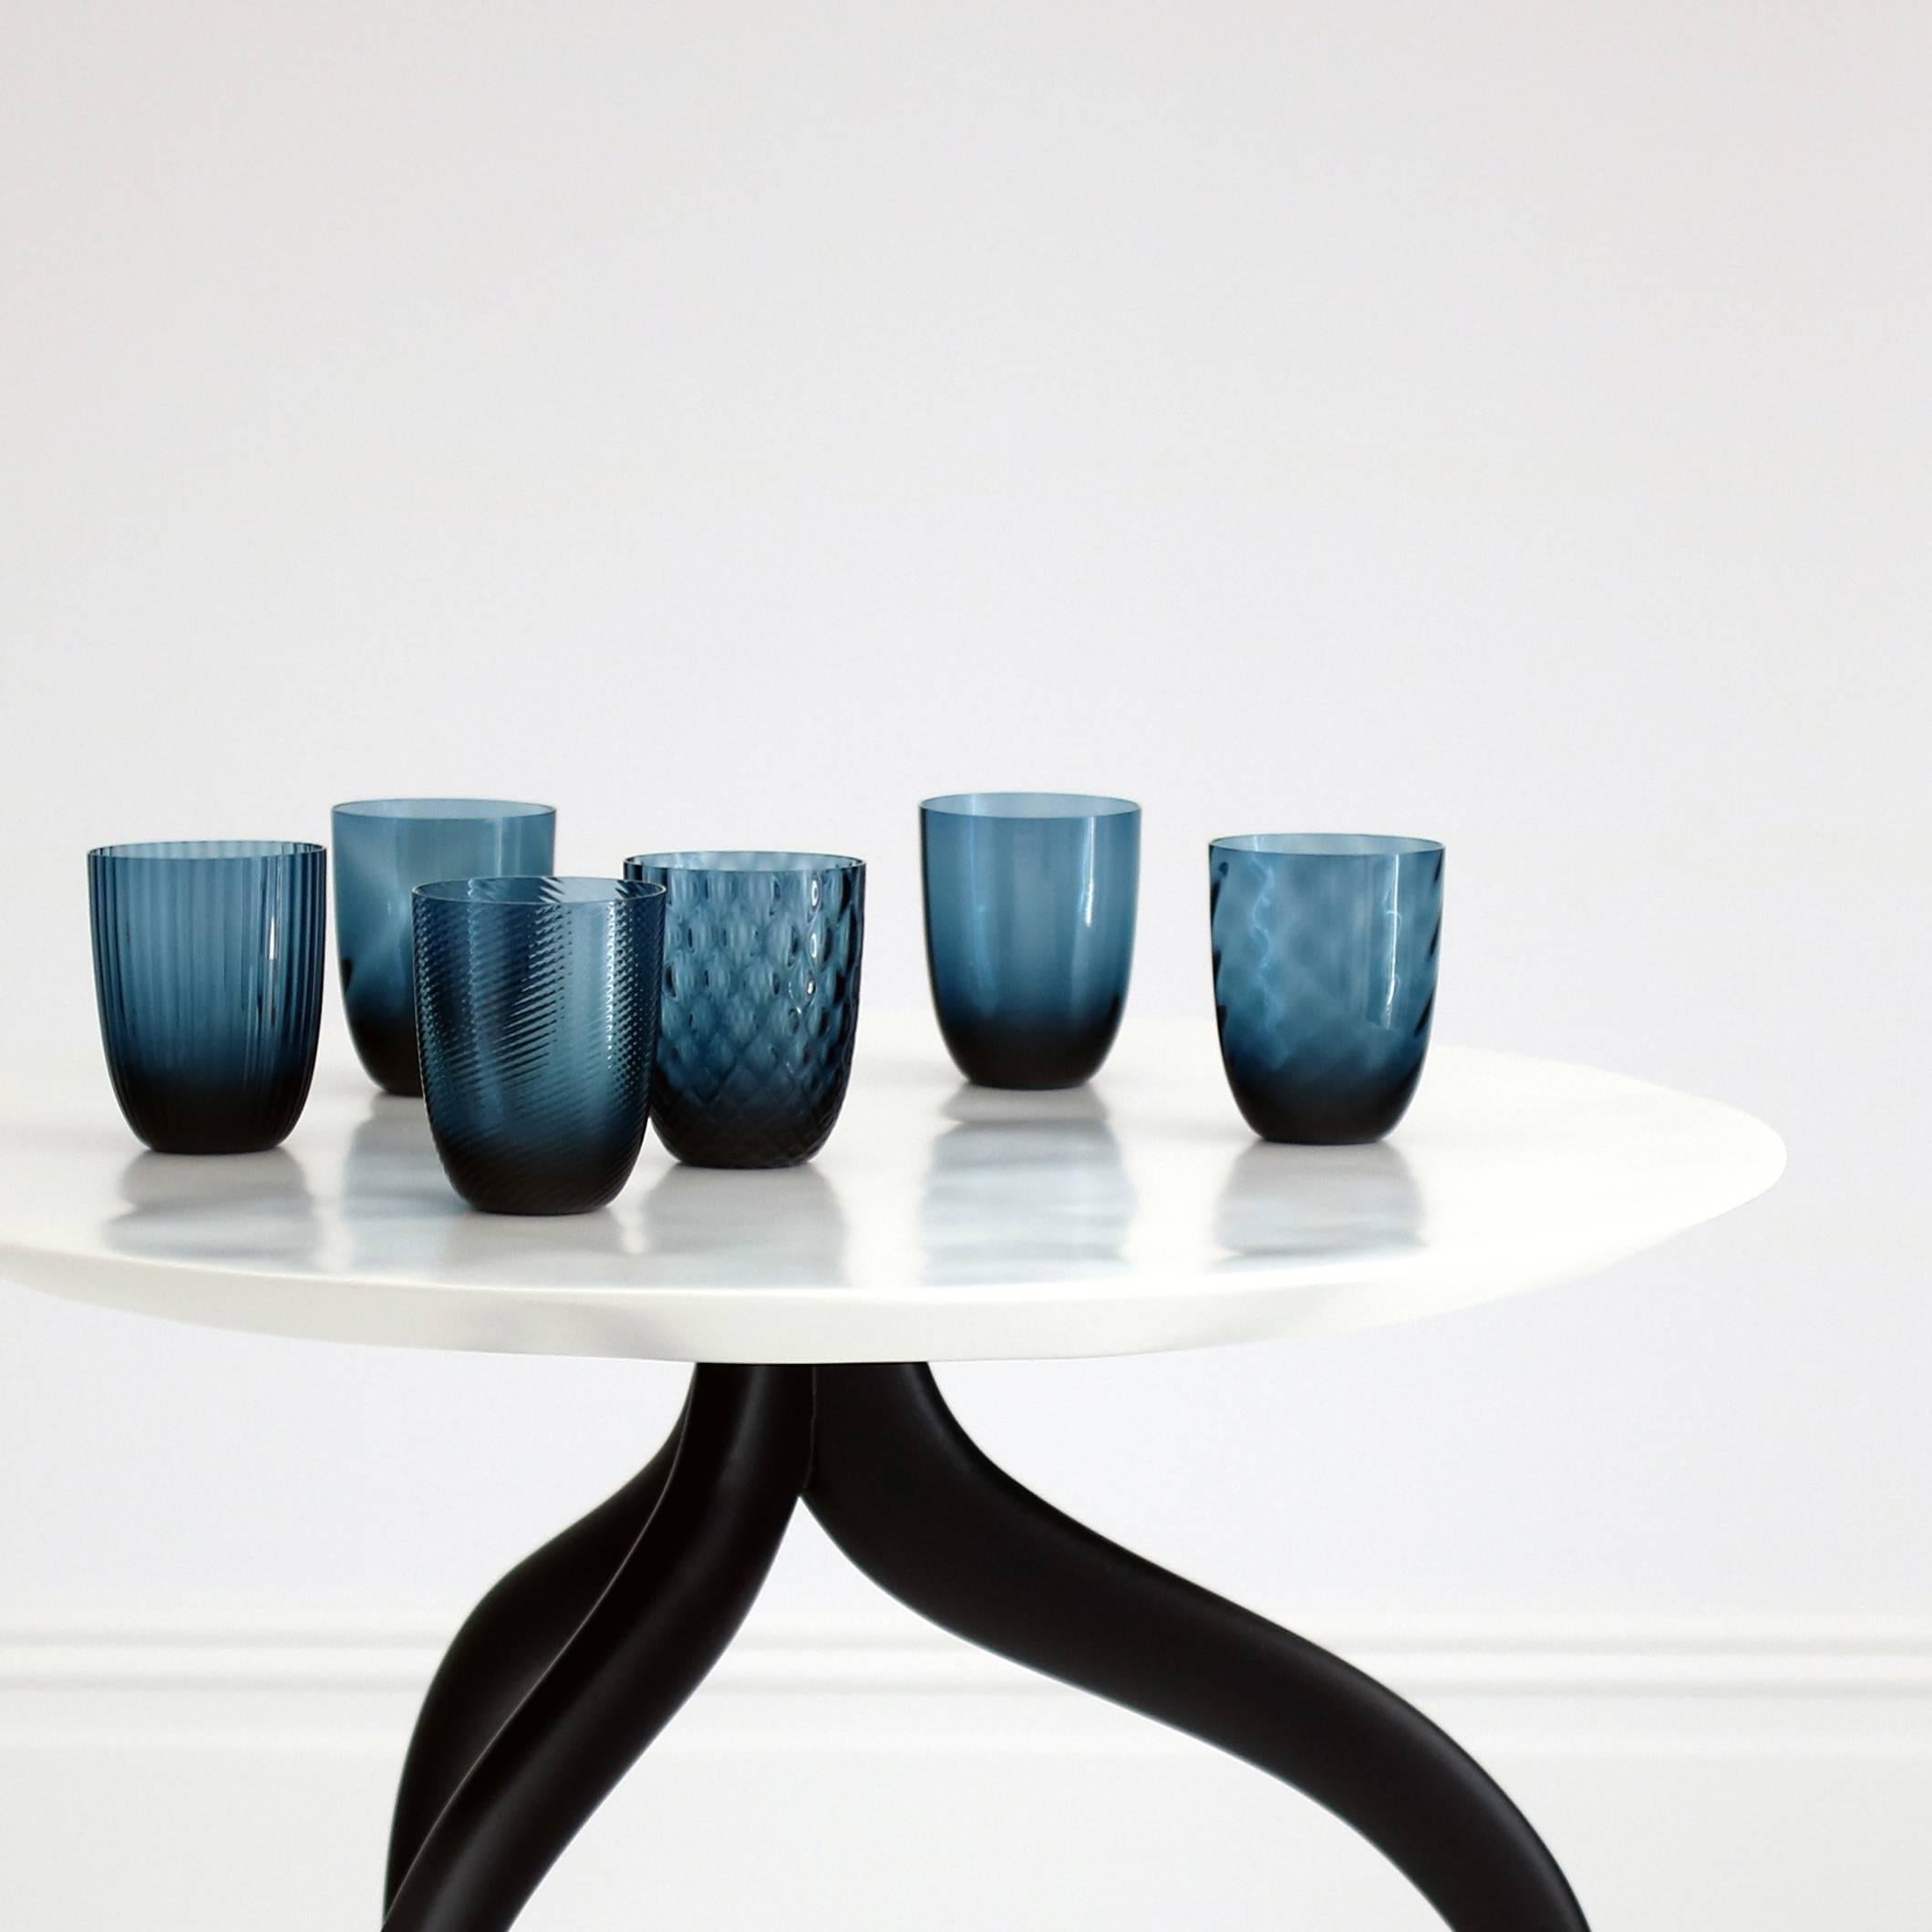 A large sea table with shell top by Giovanna Ticciati. The side table has an undulating top with a chamfered edge giving the impression of a delicate, thin surface, the ripples are carefully designed so that a glass or lamp can be placed on the